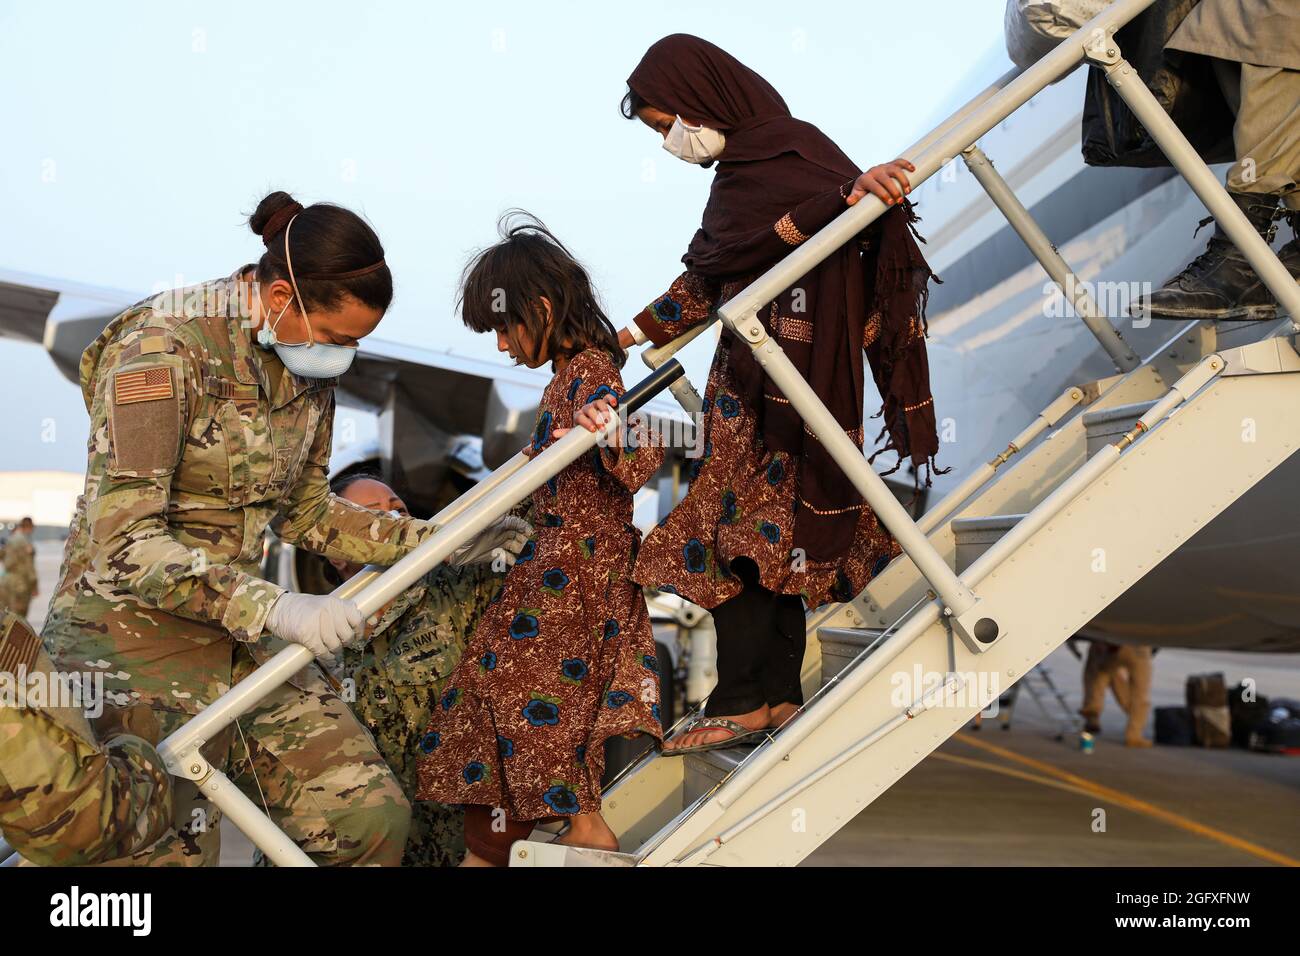 NAVAL AIR STATION SIGONELLA, Italy (Aug. 26, 2021) – U.S. Service members help Afghanistan evacuees depart a U.S. Air Force C-40B Clipper at Naval Air Station Sigonella Aug. 26, 2021. NAS Sigonella is currently supporting the Department of Defense mission to facilitate the safe departure and relocation of U.S. citizens, Special Immigration Visa recipients, and vulnerable Afghan populations from Afghanistan. NAS Sigonella’s strategic location enables U.S, allied, and partner nation forces to deploy and respond as required to ensure security and stability in Europe, Africa, and Central Command. Stock Photo